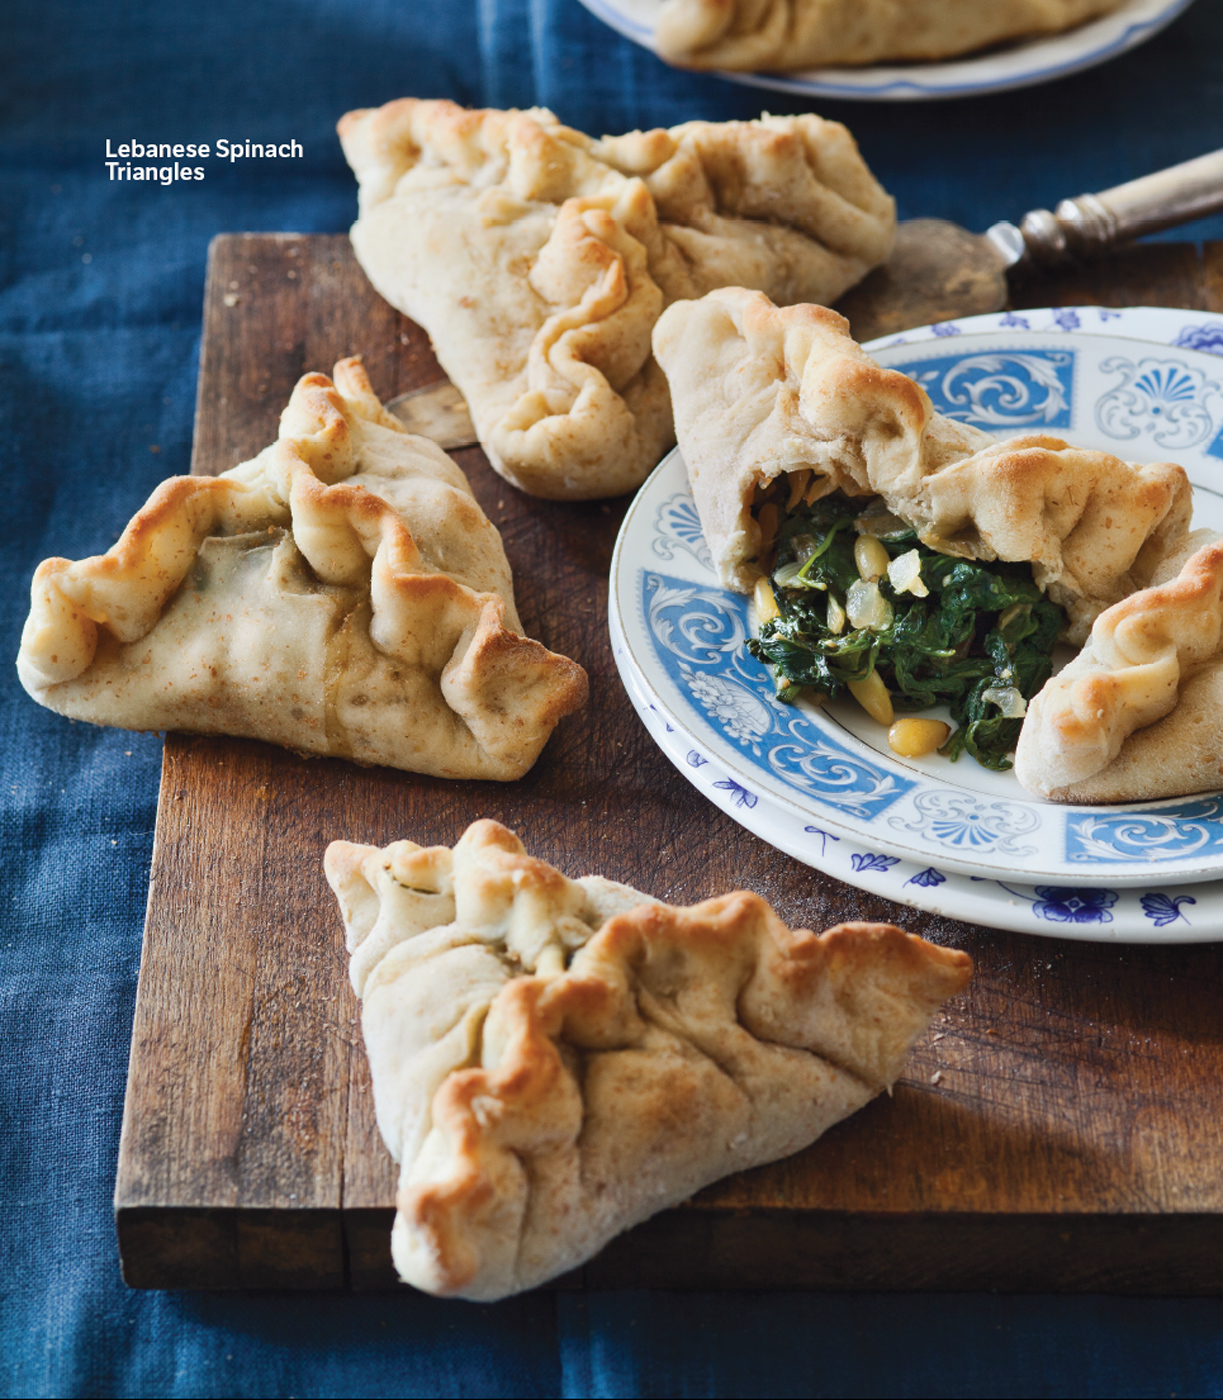 Lebanese Spinach Triangles